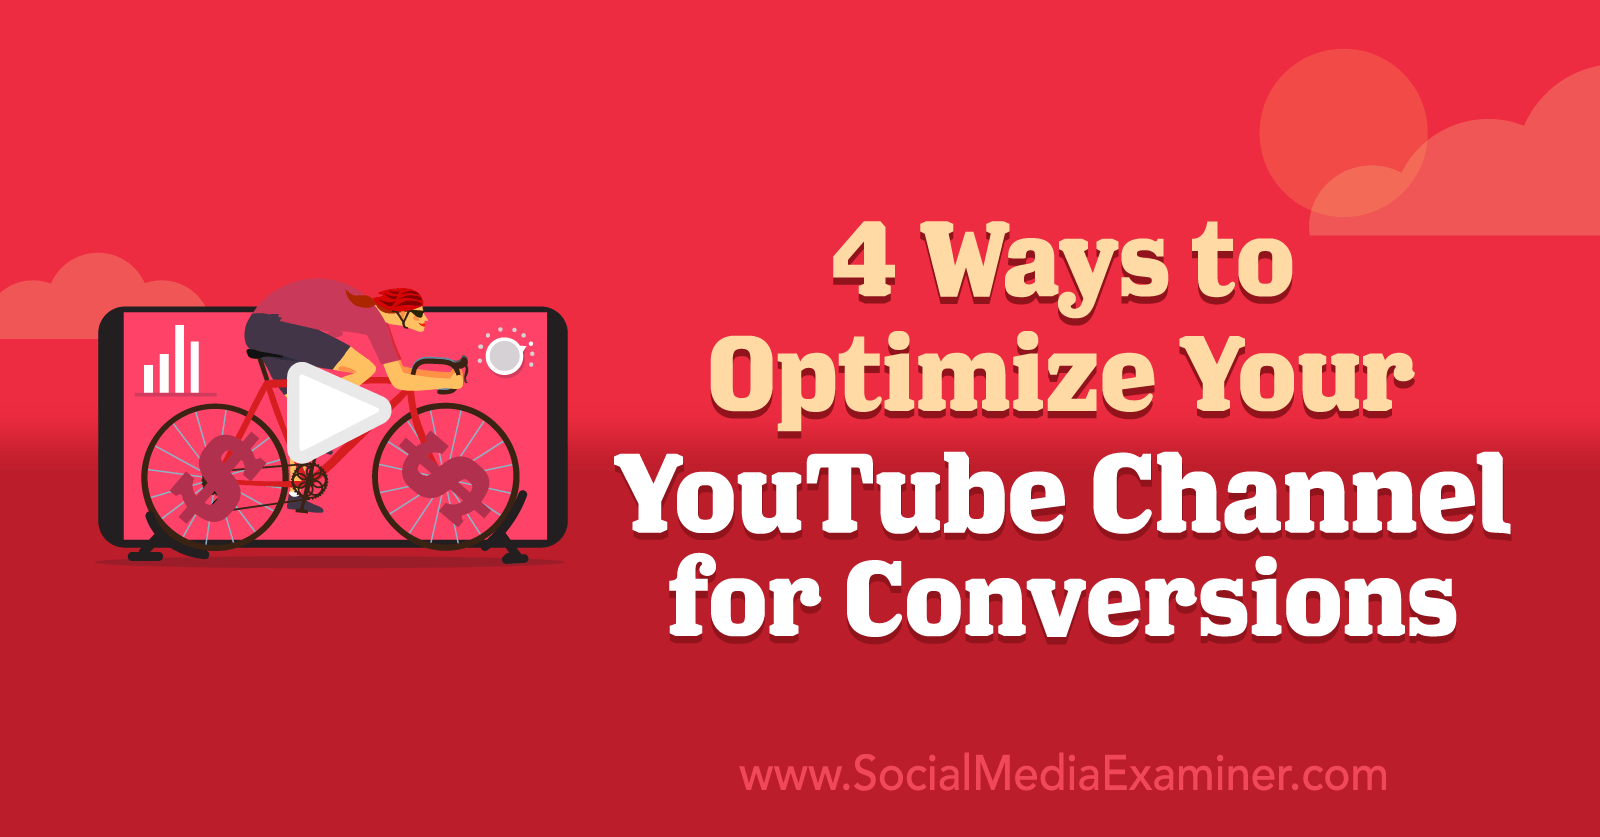 4 Ways to Optimize Your YouTube Channel for Conversions by Anna Sonnenberg